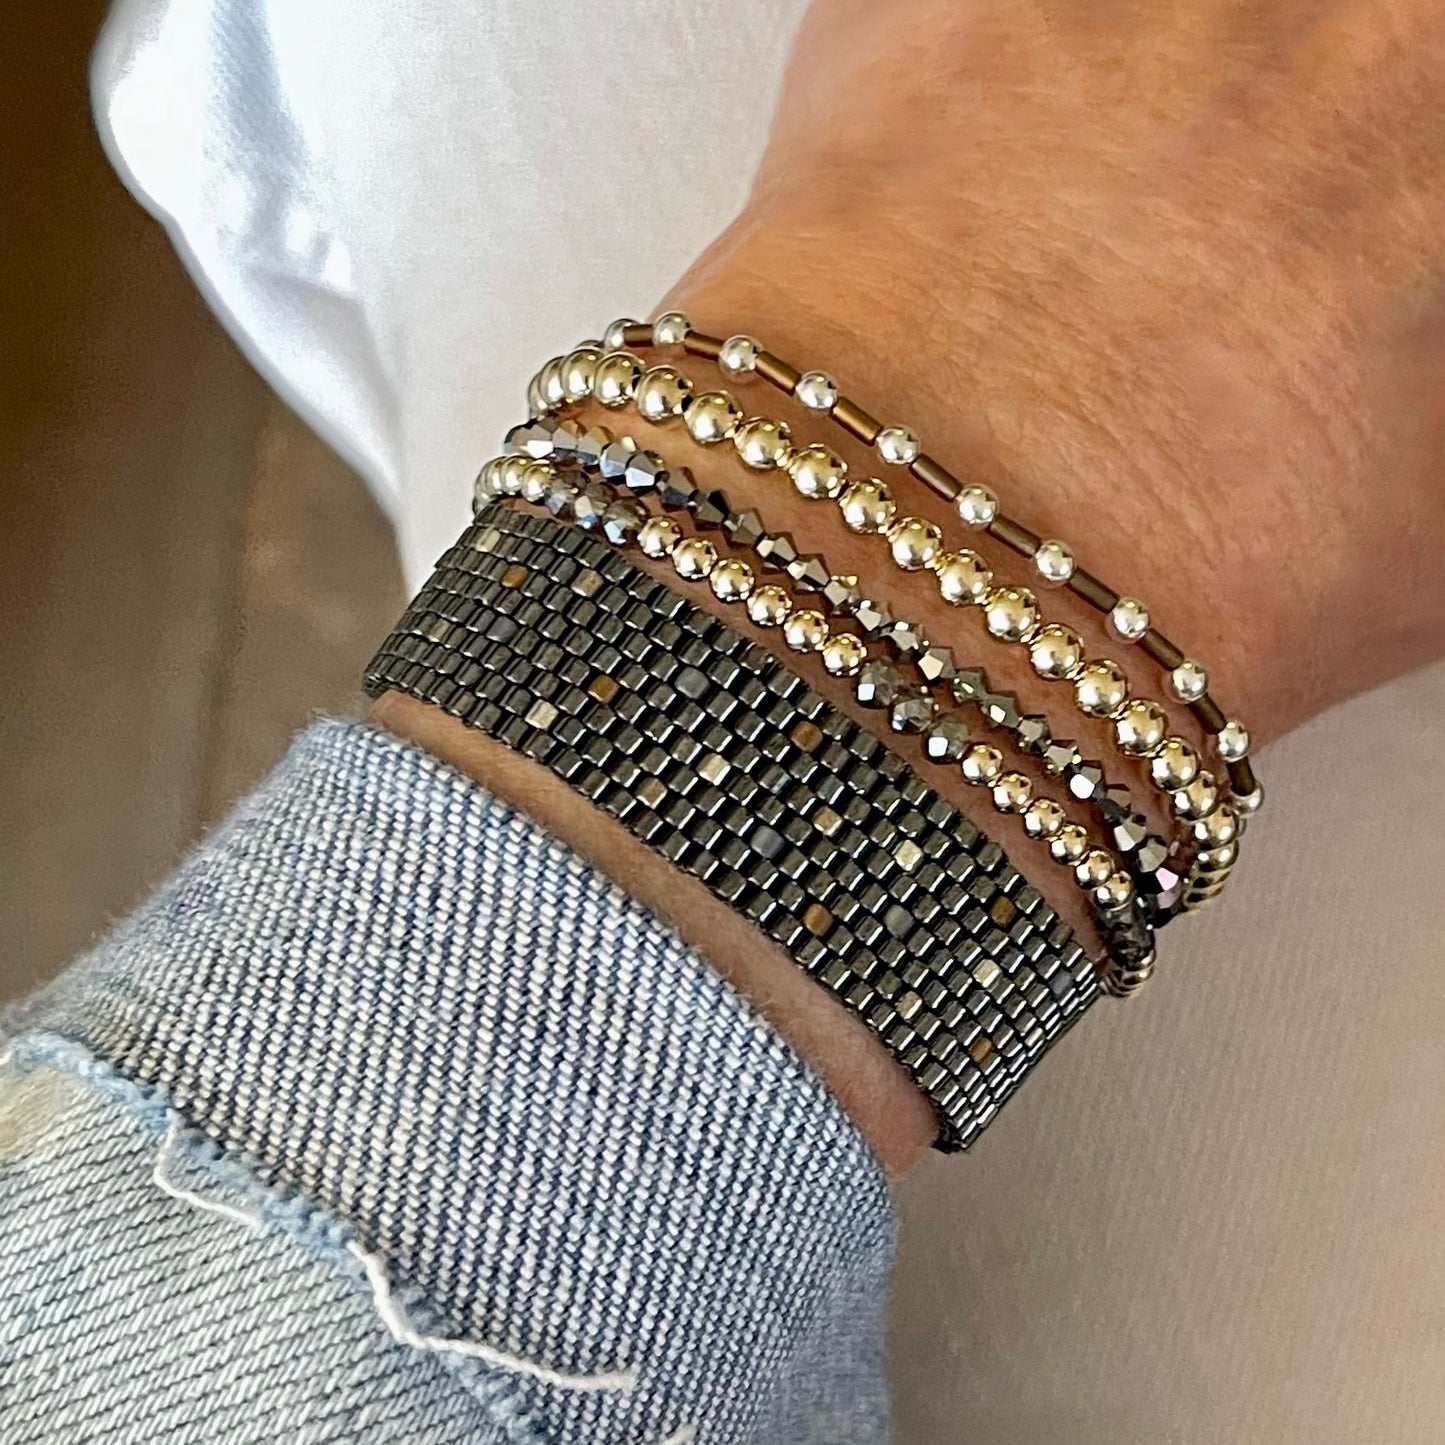 Bracelet stack with a gunmetal seed bead handwoven cuff and 4 mixed metal and crystal stretch bracelets.